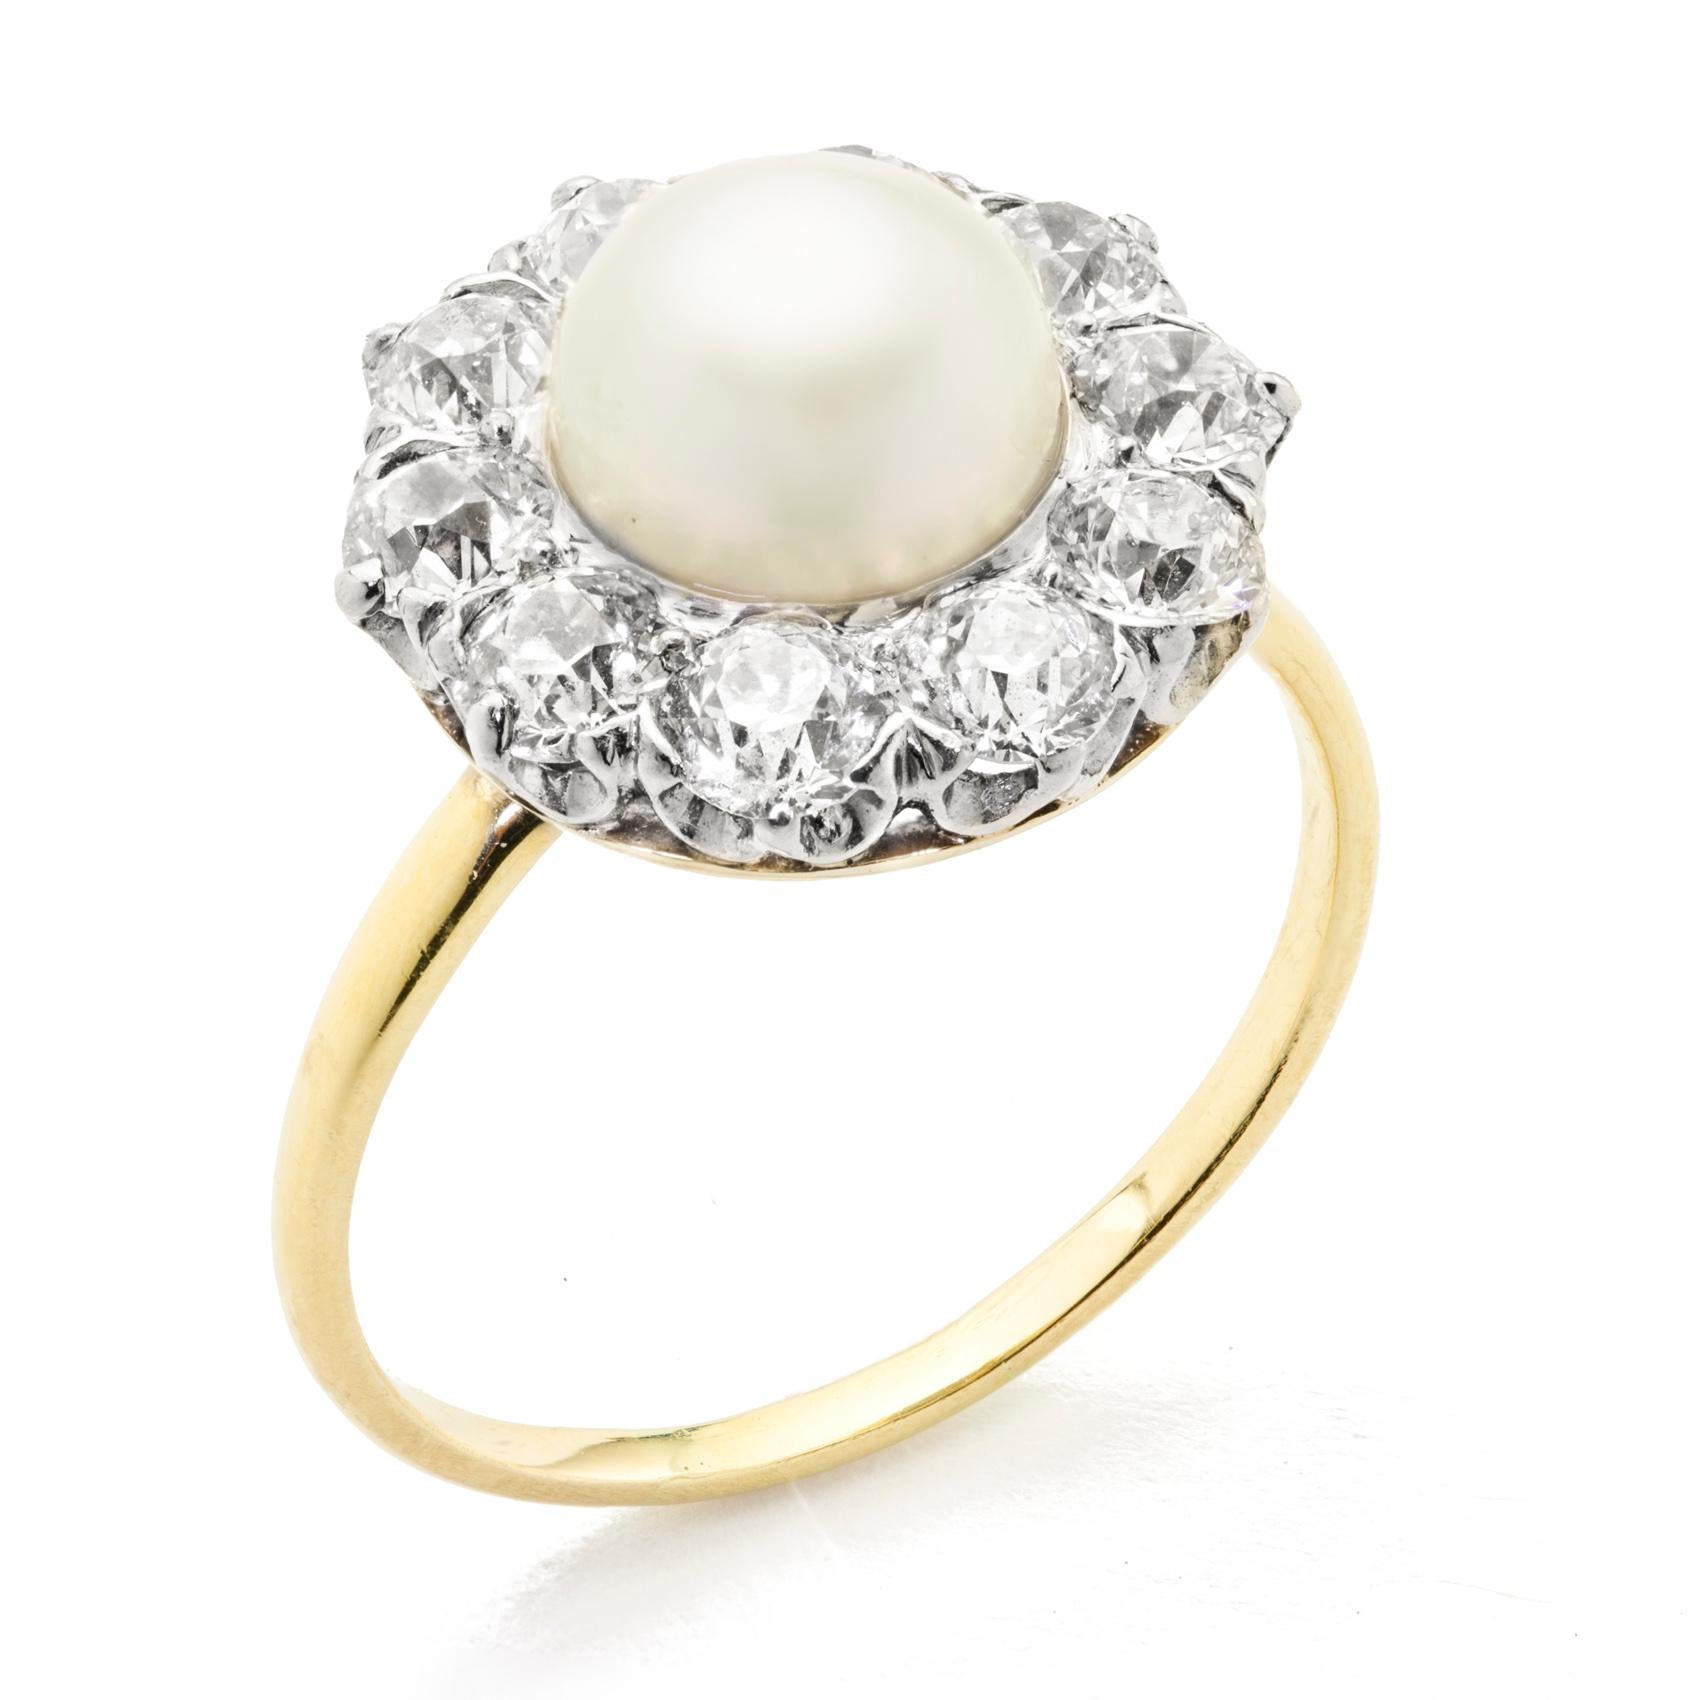 A natural pearl and diamond circular cluster ring, the pearl accompanied by an AnchorCert report  stating the pearl to weigh 2.85 carat, set to the centre of a cluster surround of ten old brilliant-cut diamonds, estimated to weigh a total of 1.80